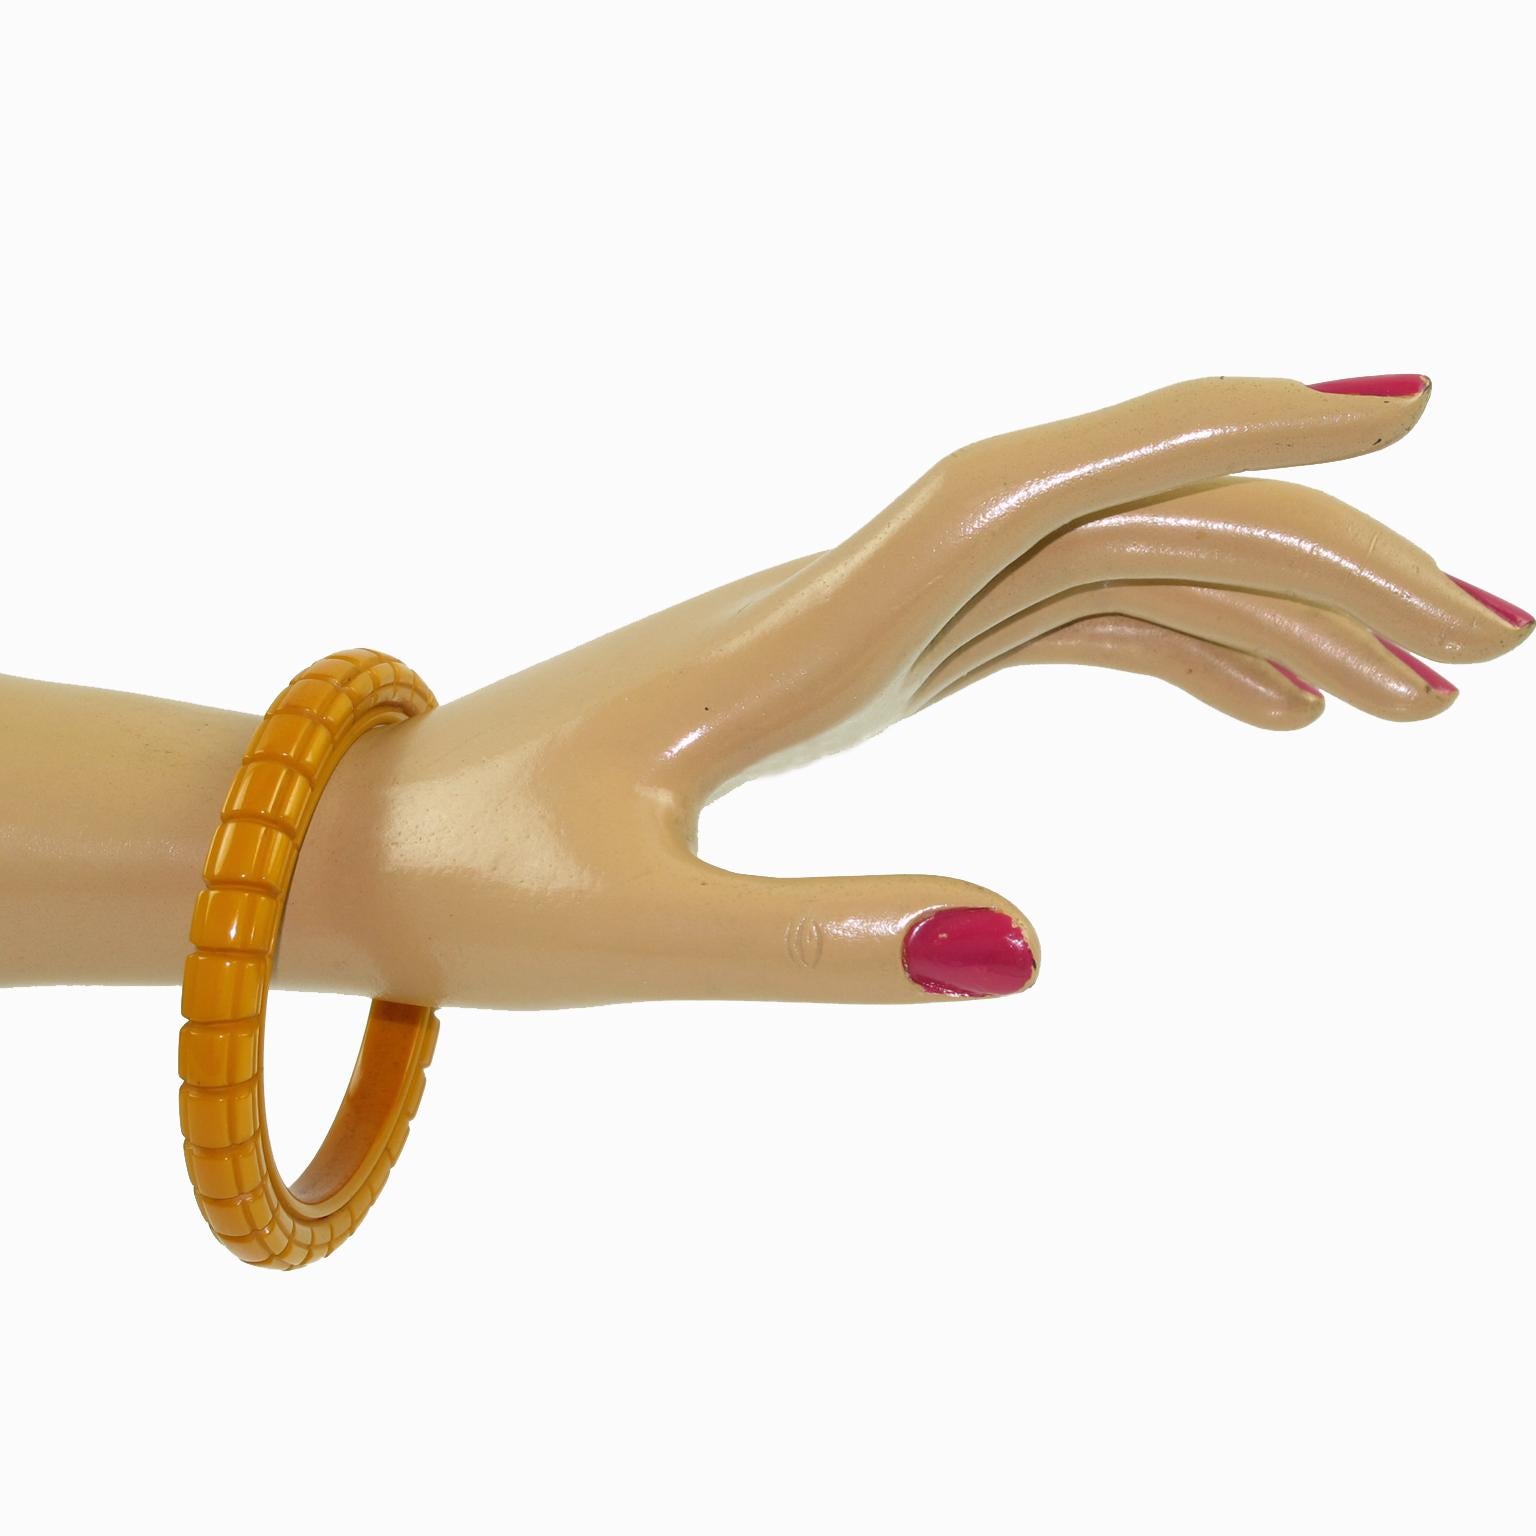 This amazing butterscotch Bakelite carved bracelet bangle features a spacer-domed shape with a deep geometric carving all around it and a thick wall. The piece boasts an intense yellow butterscotch color. 
Measurements: Inside across is 2.63 in